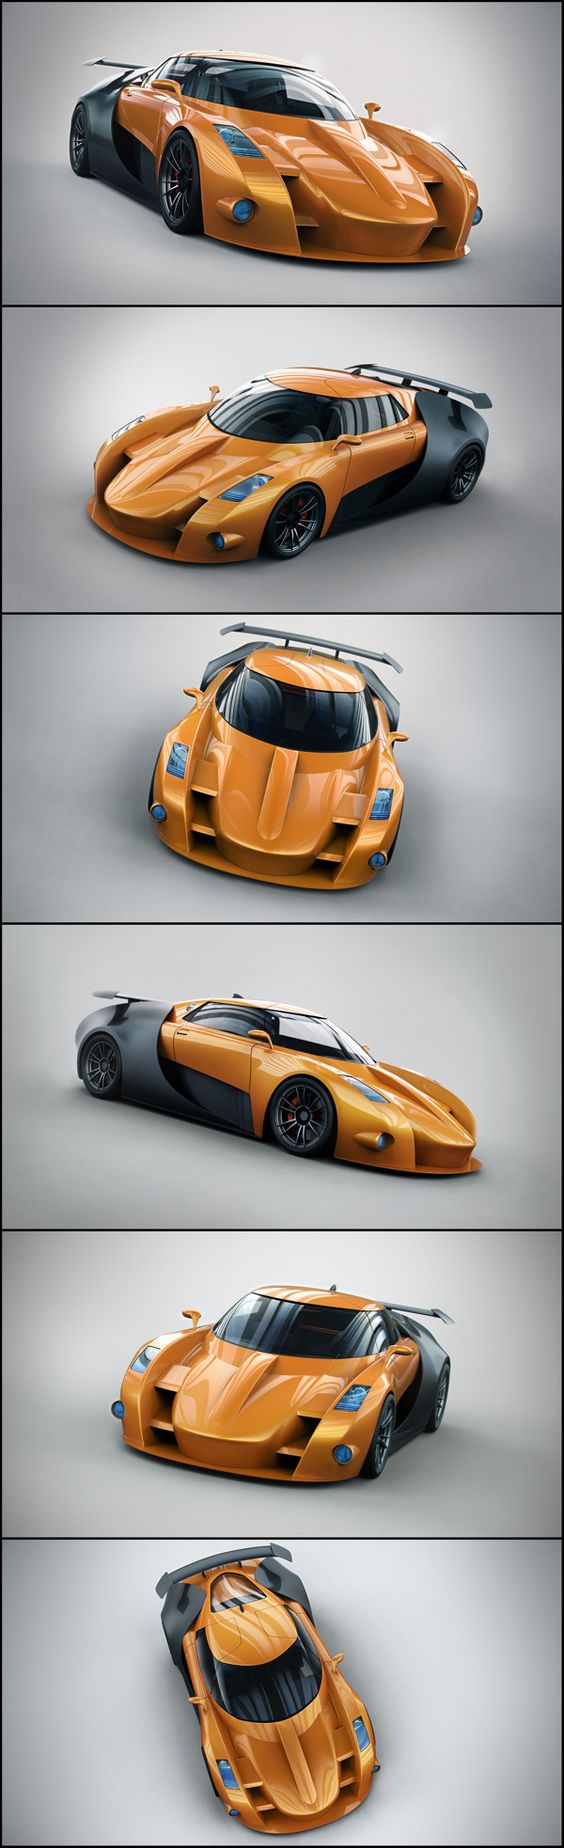 Awesome Cars ‘’ Concept A - Concept Car ‘’ Cars Design And Concepts, Best Of New Cars